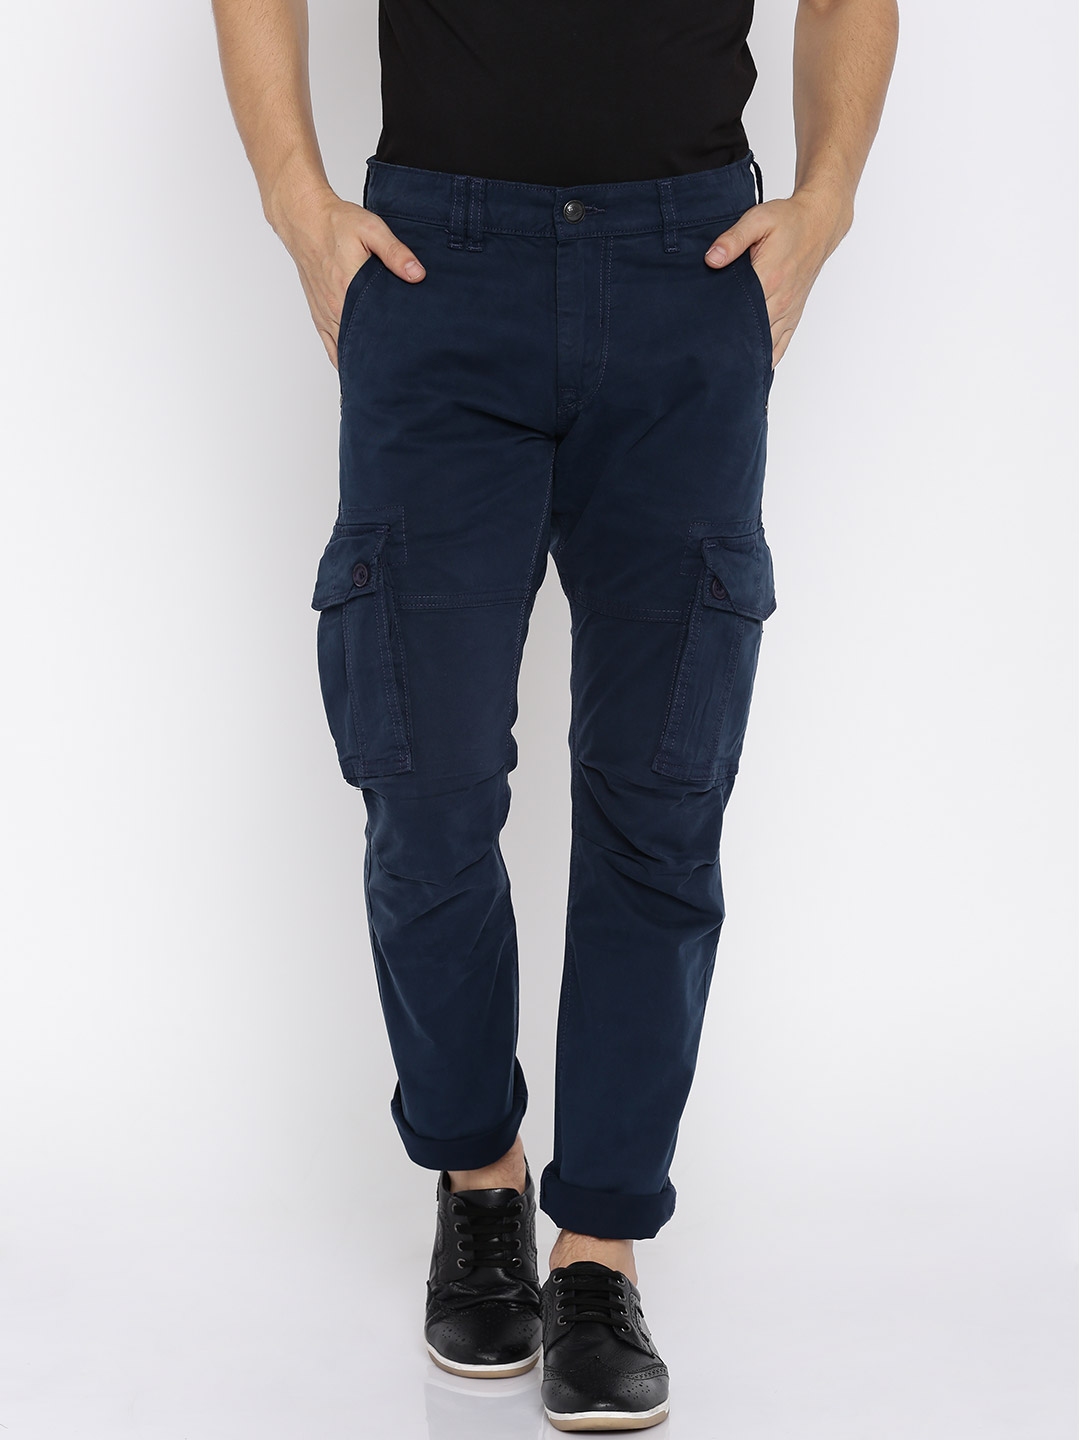 Classic Navy Stretch Cargo Pants